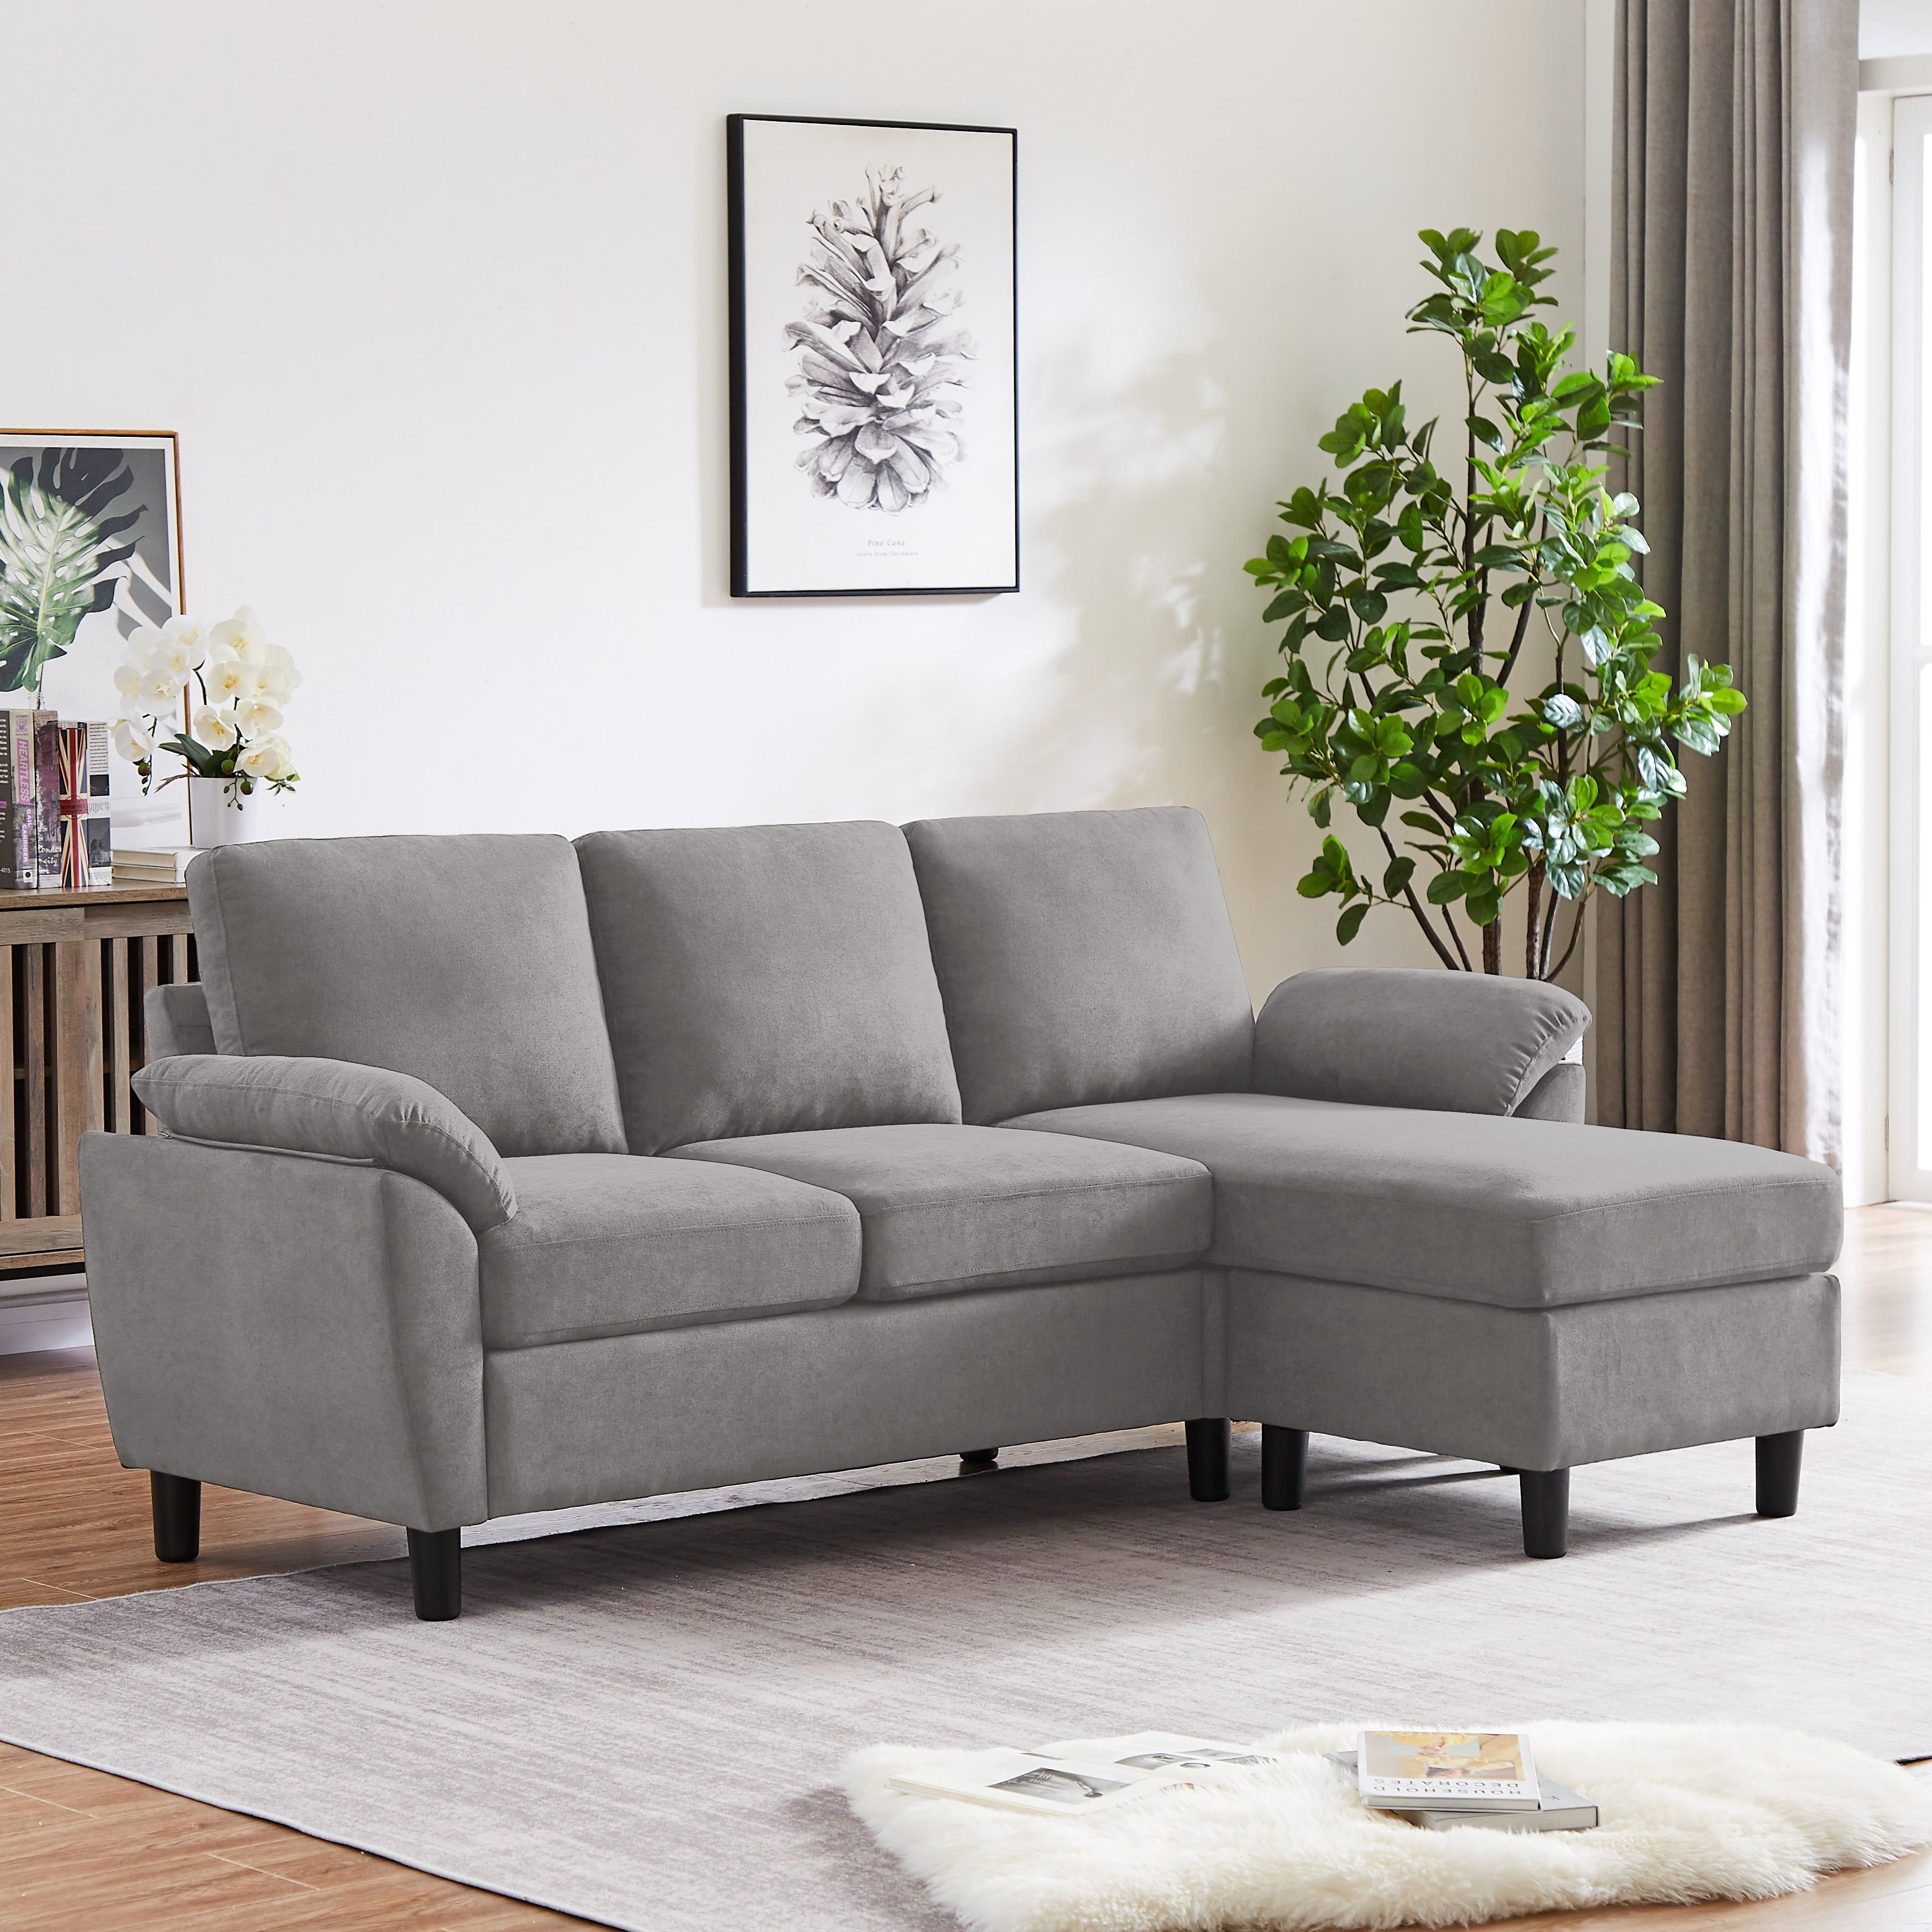 Jarenie Modern Fabric L Shapped Sofa Sectional Couches For Living Room Convertible  Sofa With Matching Chaise For Office, Apartment, Studio – Walmart With Convertible Sofa With Matching Chaise (Photo 2 of 15)